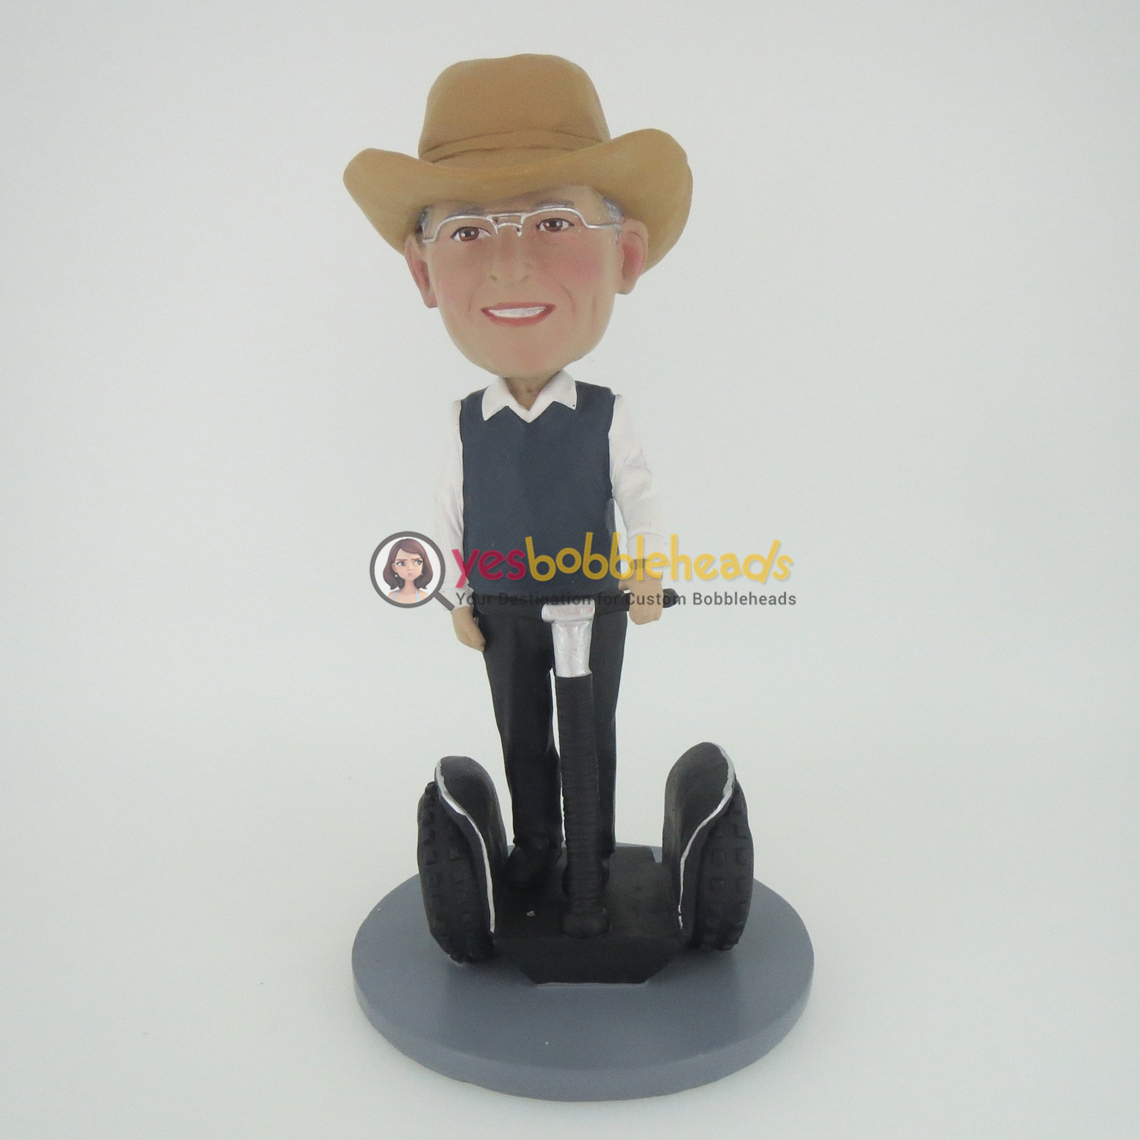 Picture of Custom Bobblehead Doll: Man On Balancing Vehicle